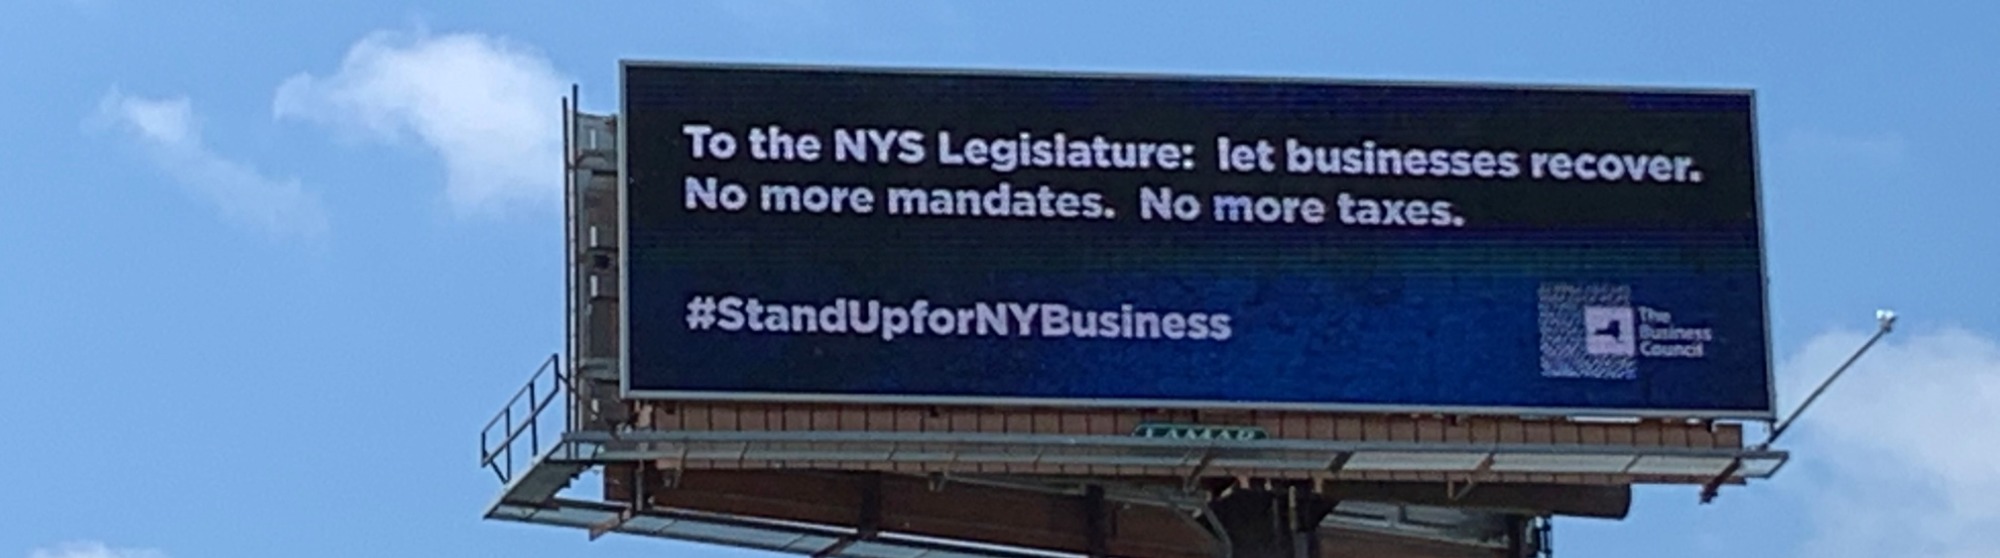 Stand Up for NY Business billboard